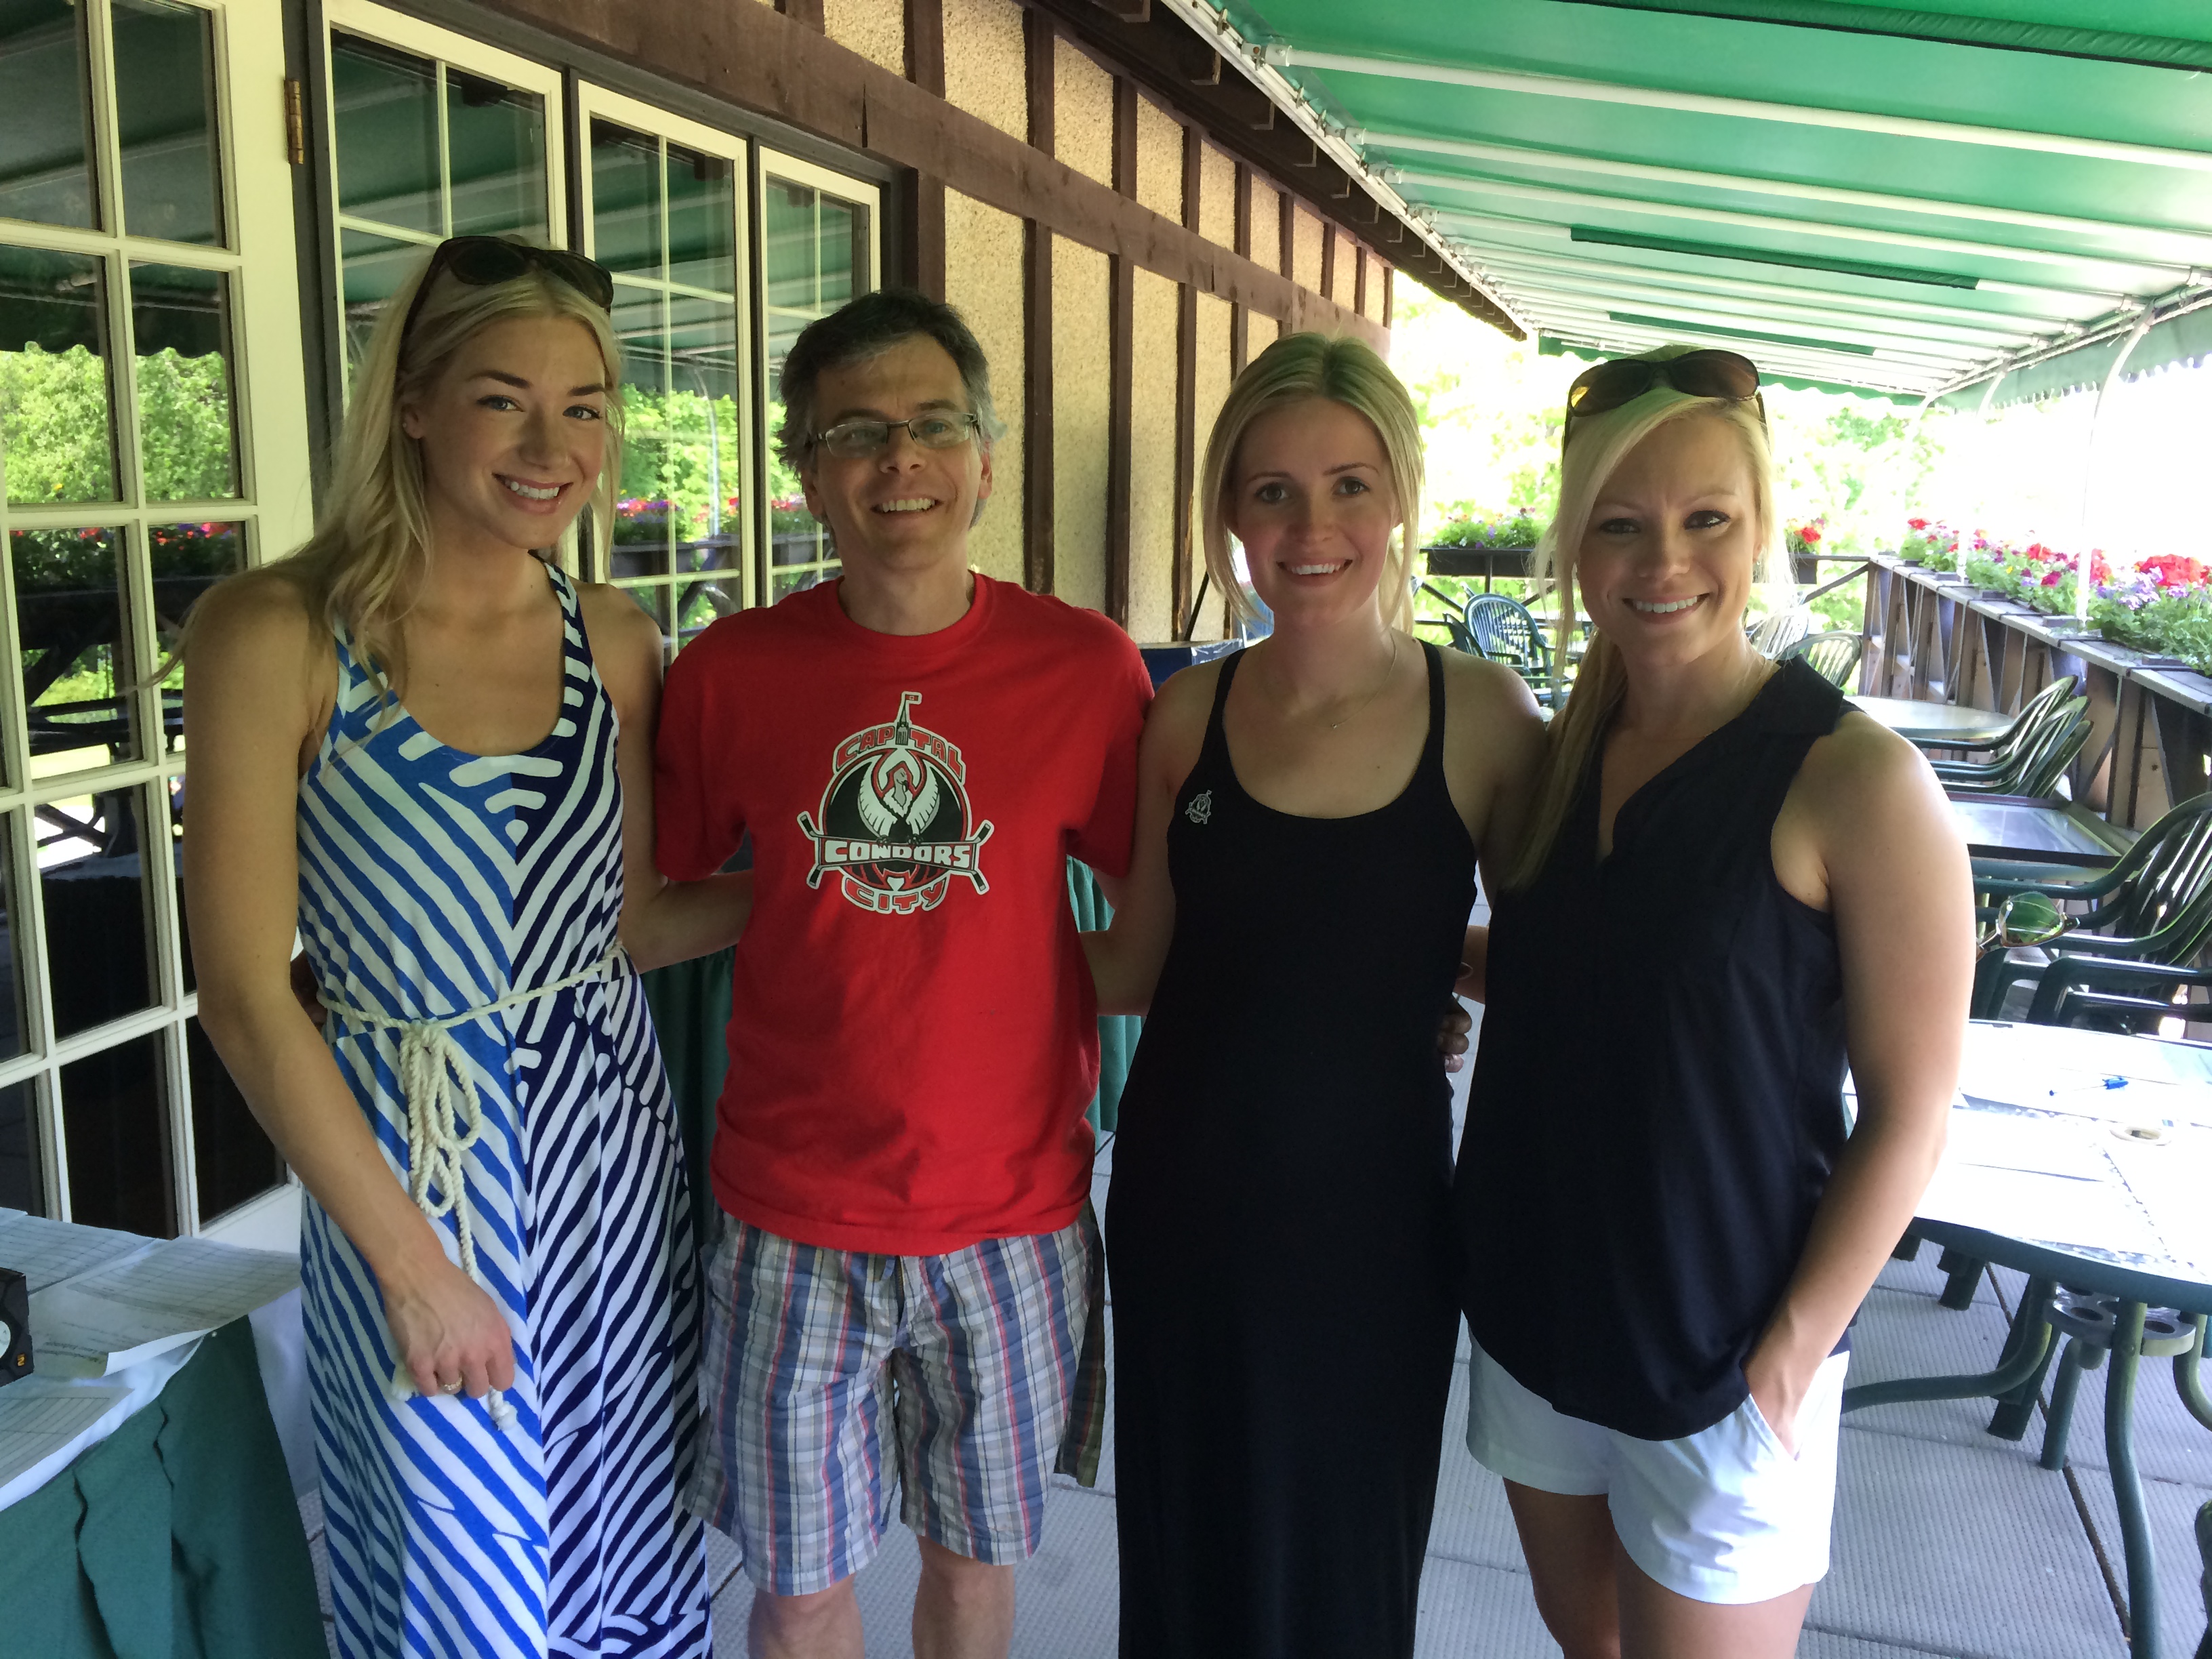 Thanks to Mark (golf tourney chair), Kresson, Julie, & Amanda for their incredible support!